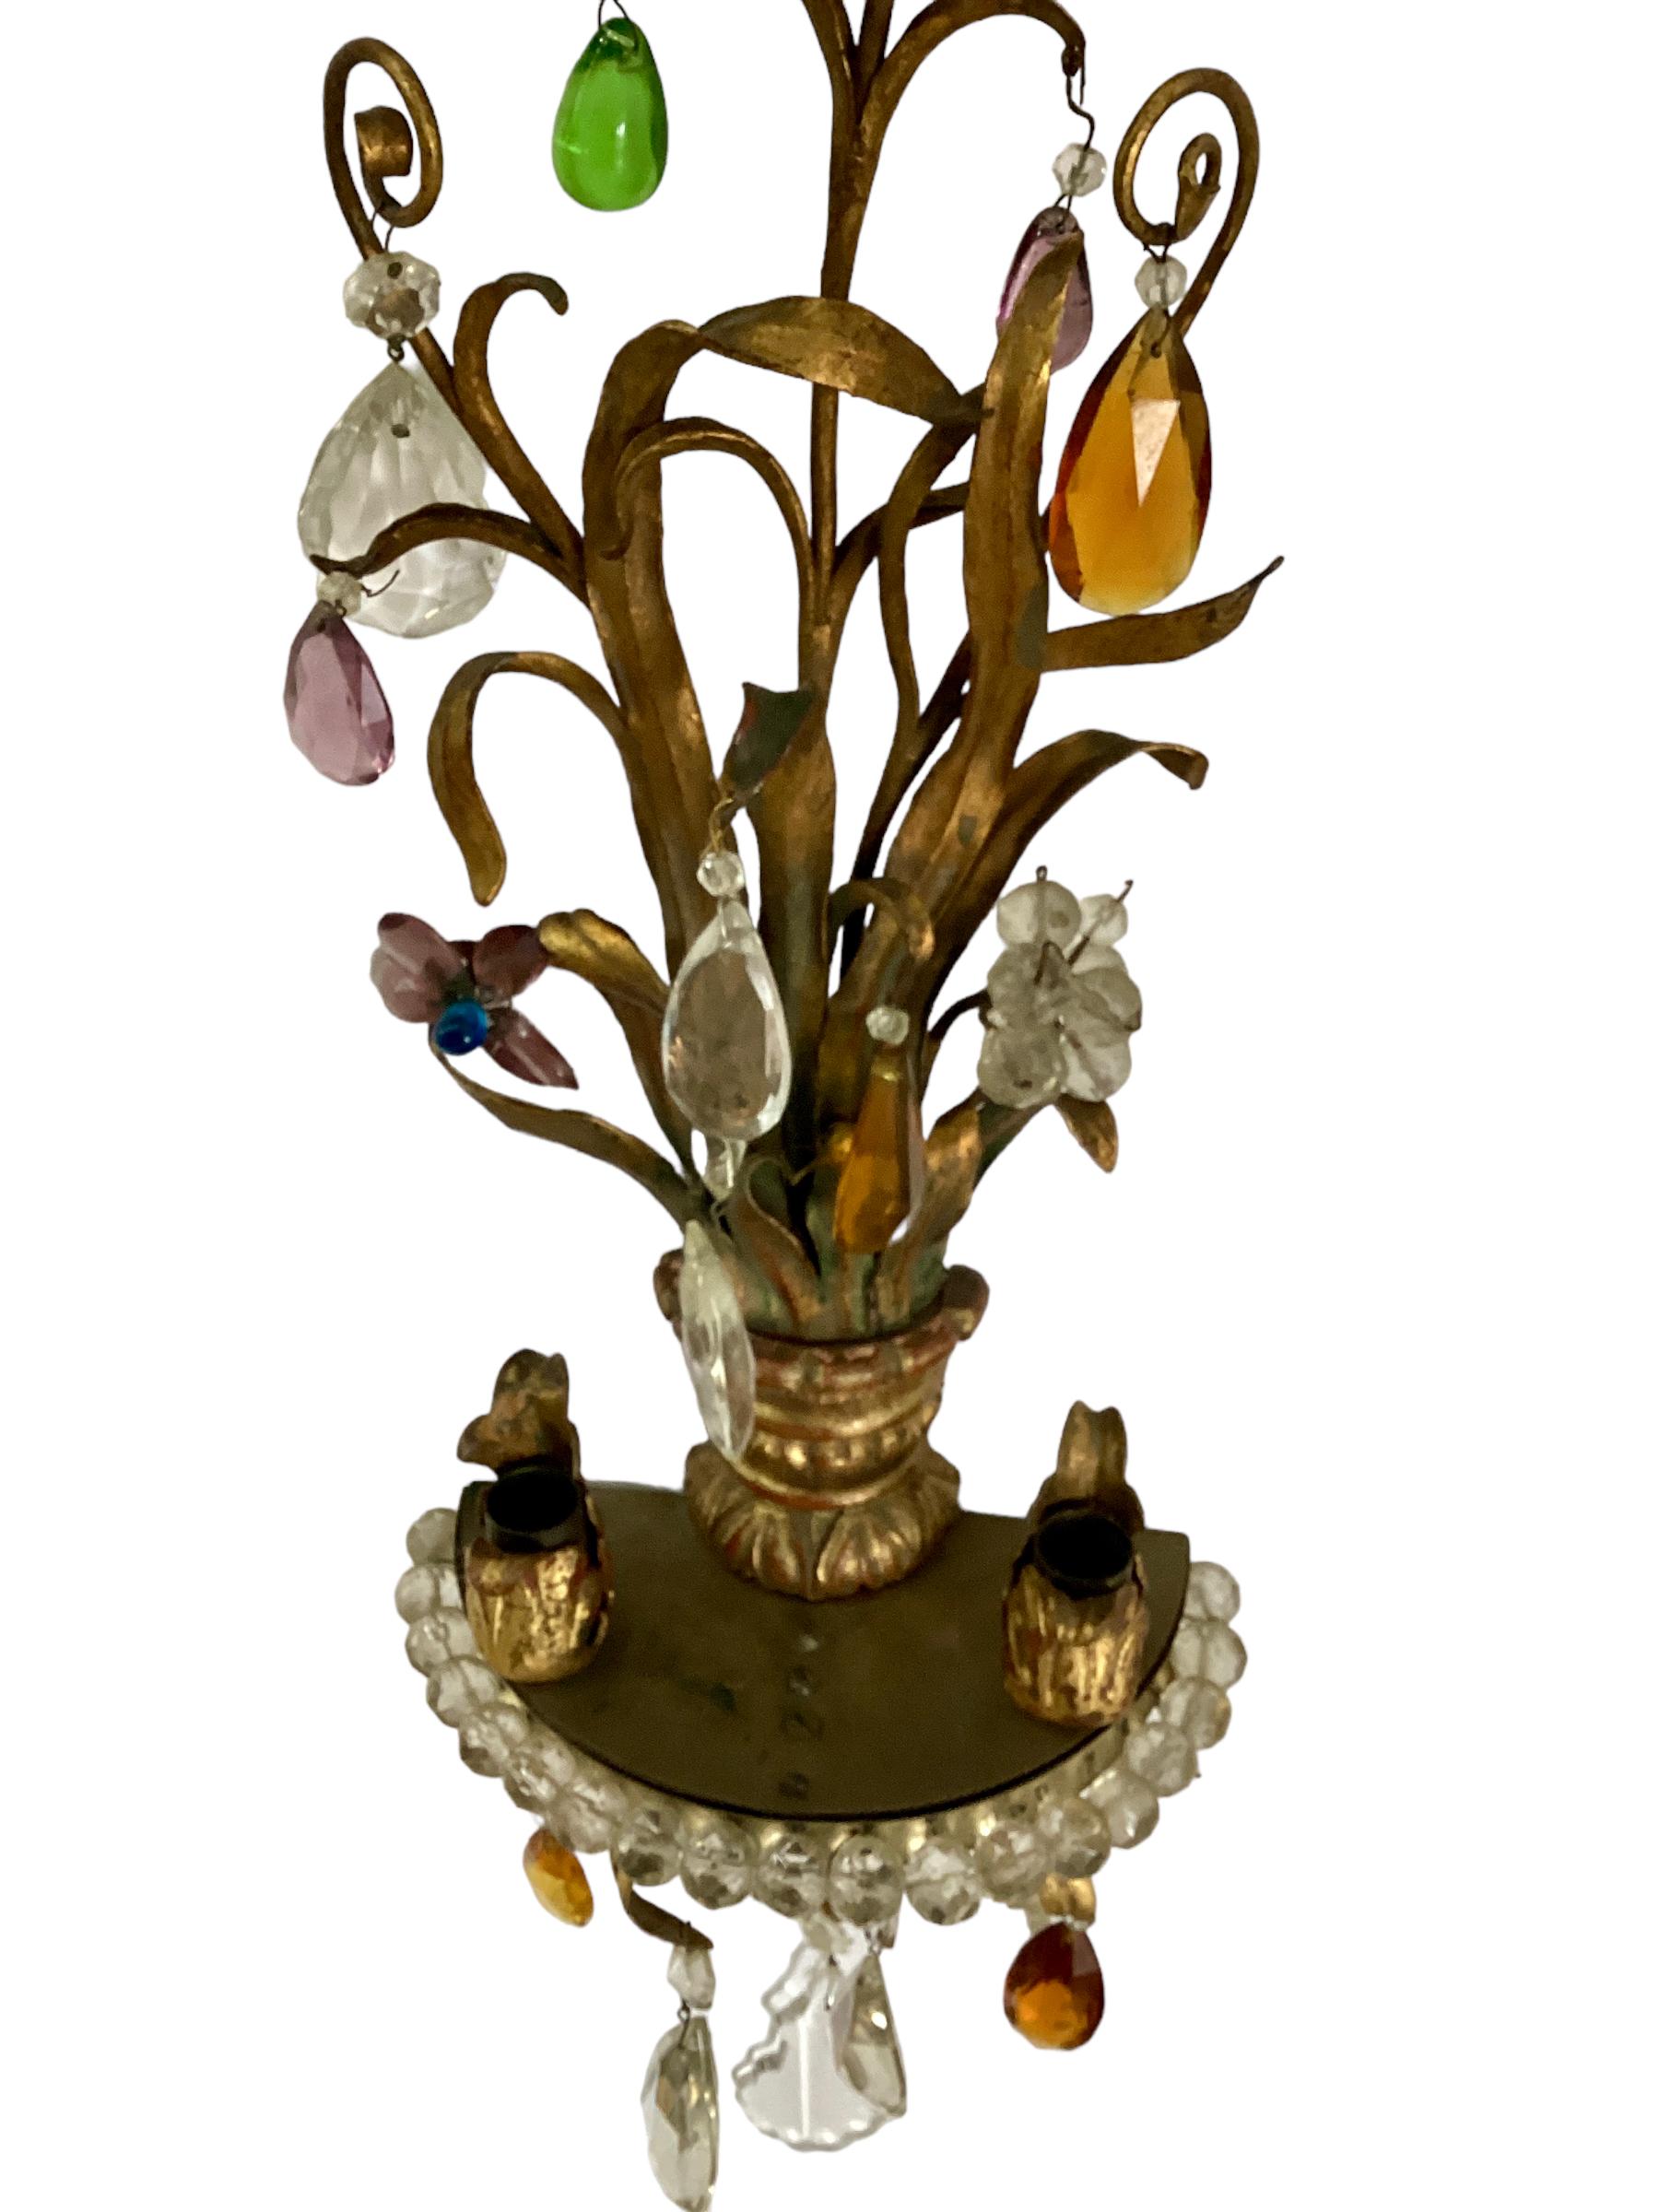 A gorgeous Set of Four Italian Giltwood and Gilt Metal Sconces with Colored Crystals. Two light candle sconces that can easily be wired for electricity. Foliate design with various colors of crystals intermingled with clear cut crystals. 